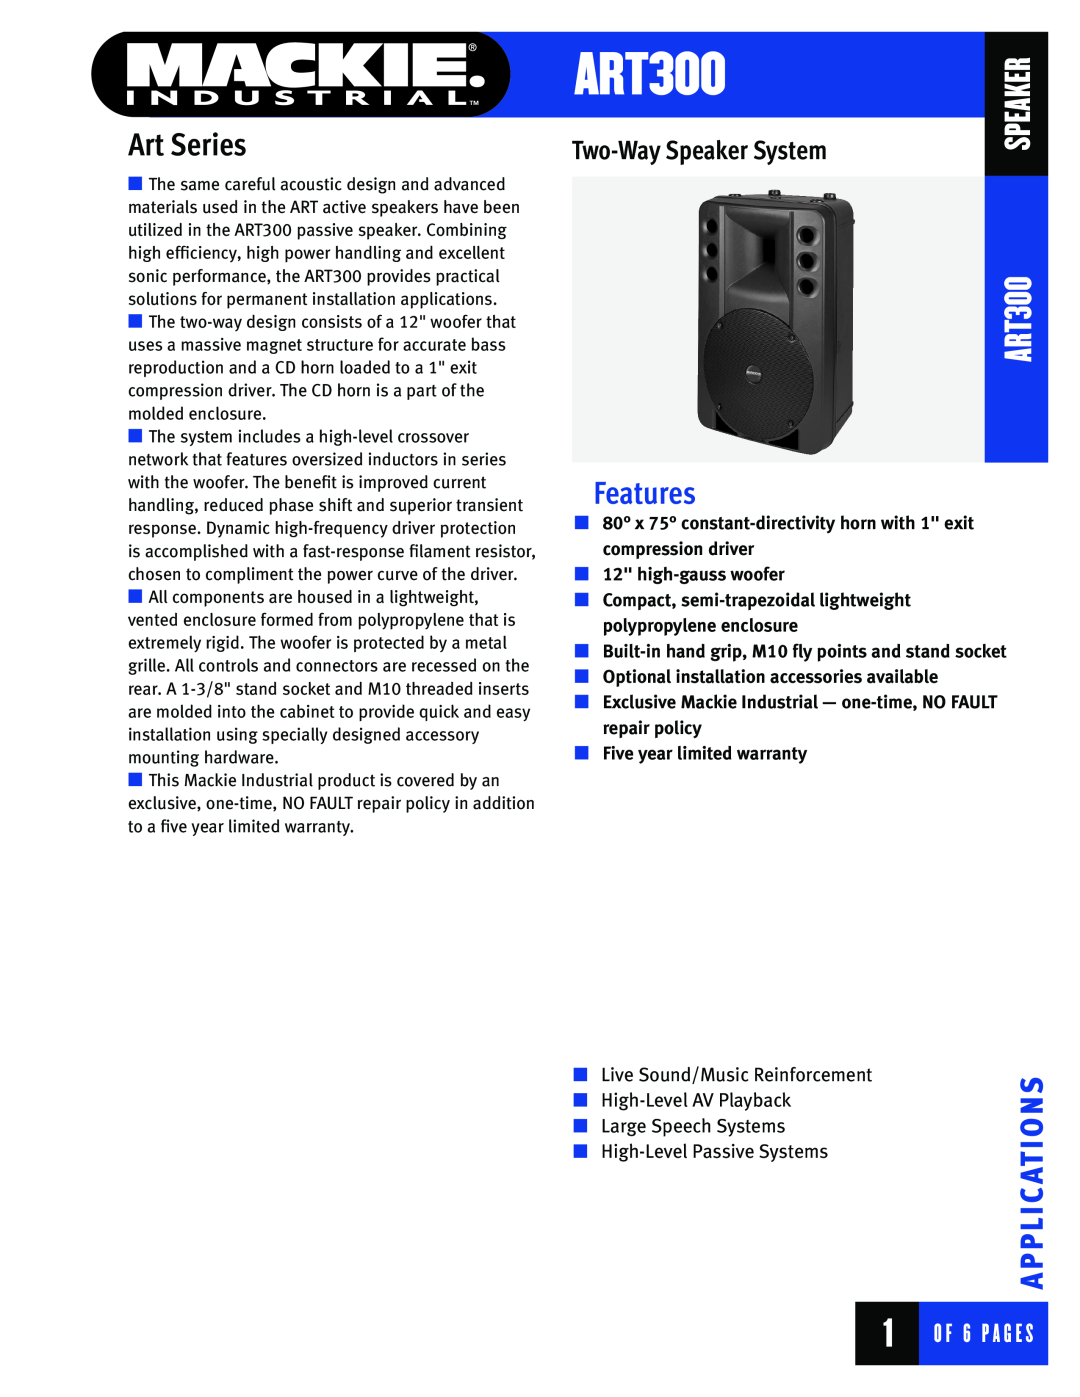 Mackie ART300 warranty Features, Sn Oi, O F 6 P A G E S, Art Series, Two-WaySpeaker System, High-LevelPassive Systems 